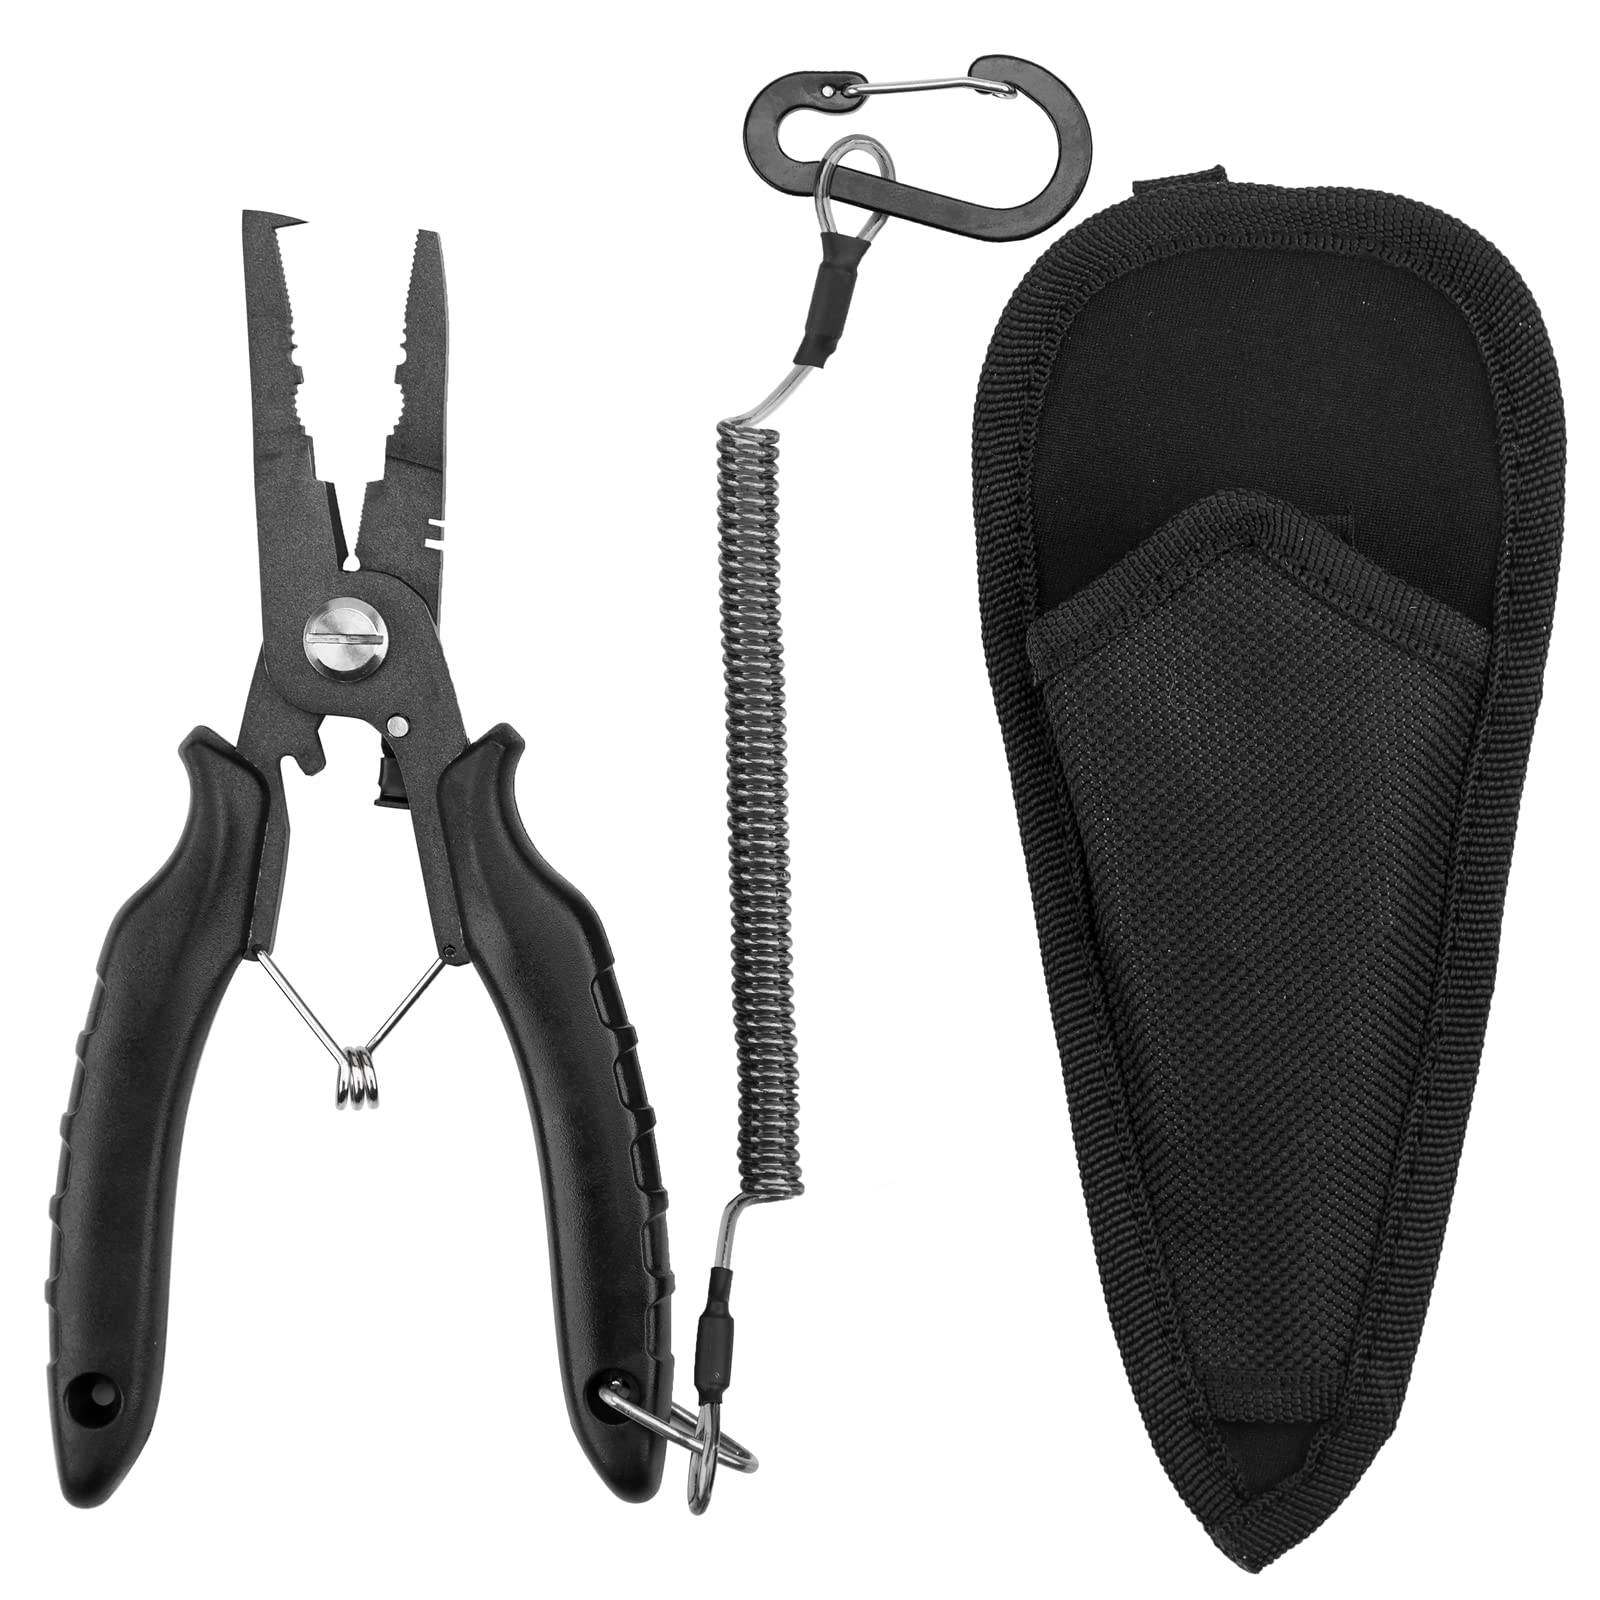 Fishing Pliers, Stainless Steel Fishing Tools, Multifunctional Fishing  Accessories, Split Ring Pliers, Fishing Line Cutter, Fishing Pliers  Saltwater With Sheath and Lanyard, Fishing Gifts for Men